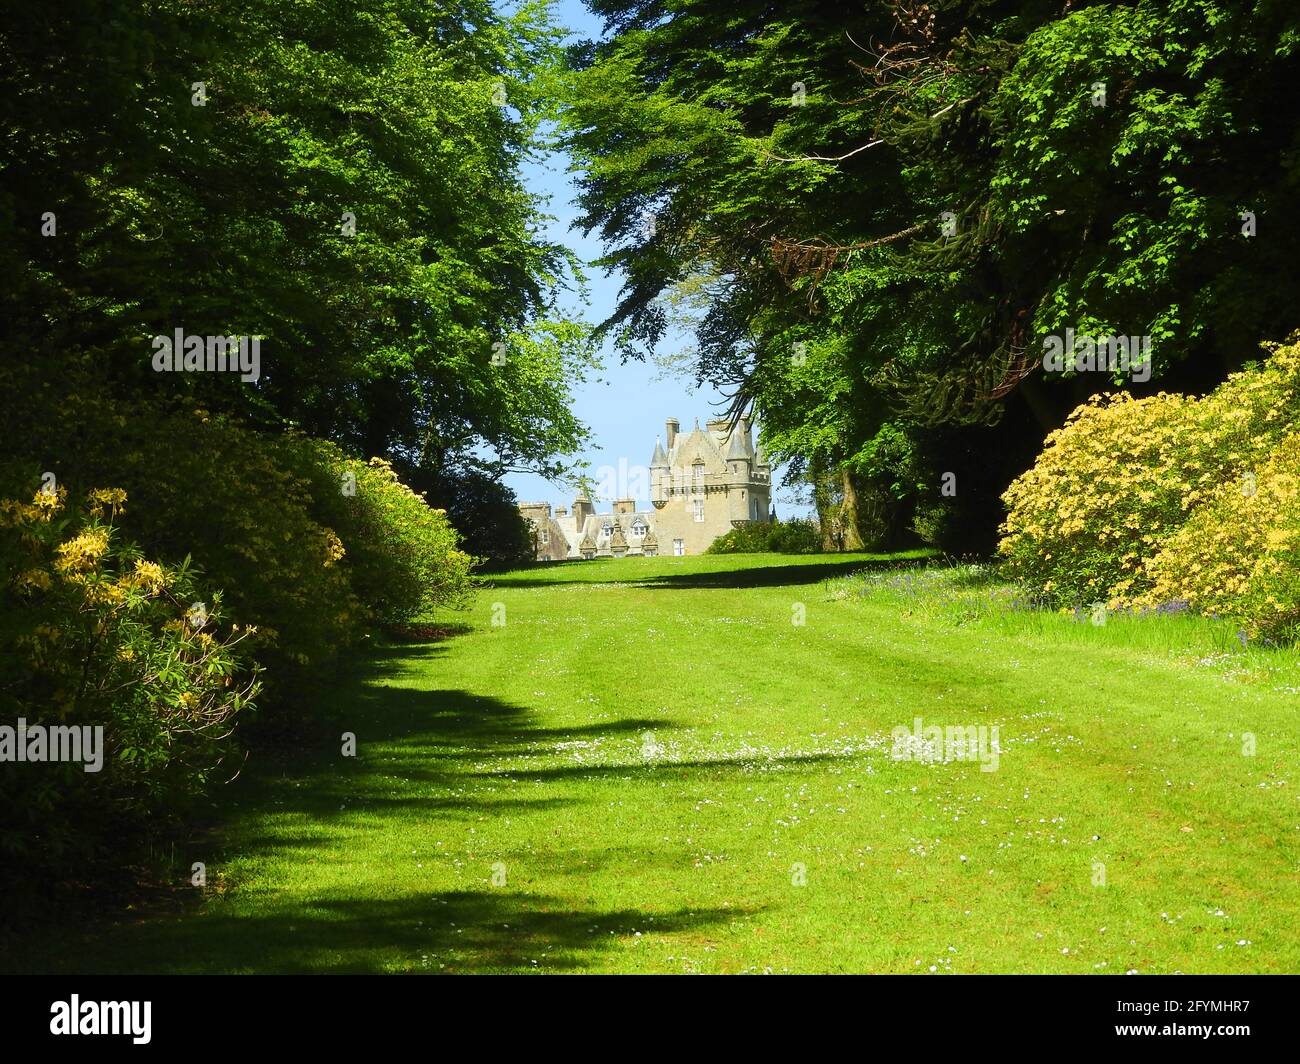 Castle Kennedy Gardens & Gardens, Dumfries & Galloway, Scotland in 2021 - A distant view of Inchcliff Castle from The Monkey Puzzle tree avenue Stock Photo